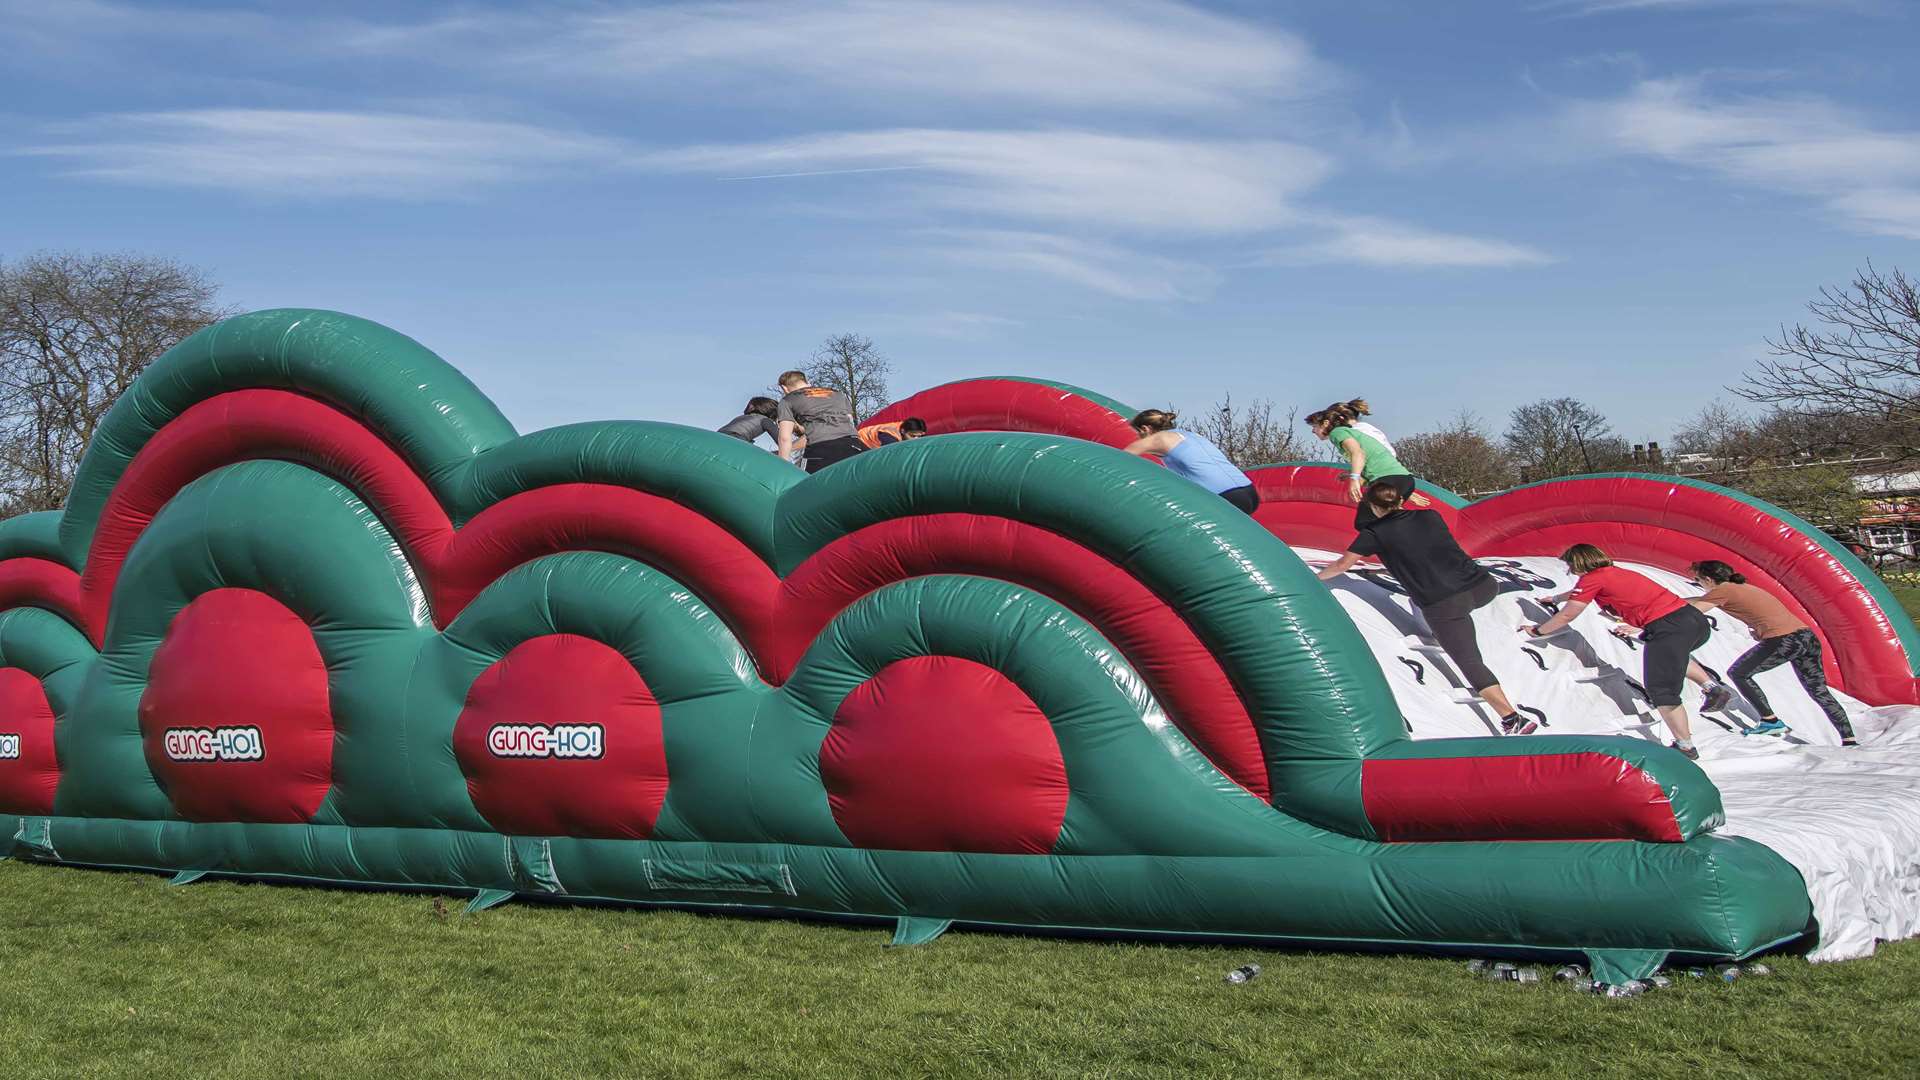 The Gung-Ho! inflatable contains enough air to fill 12 million footballs